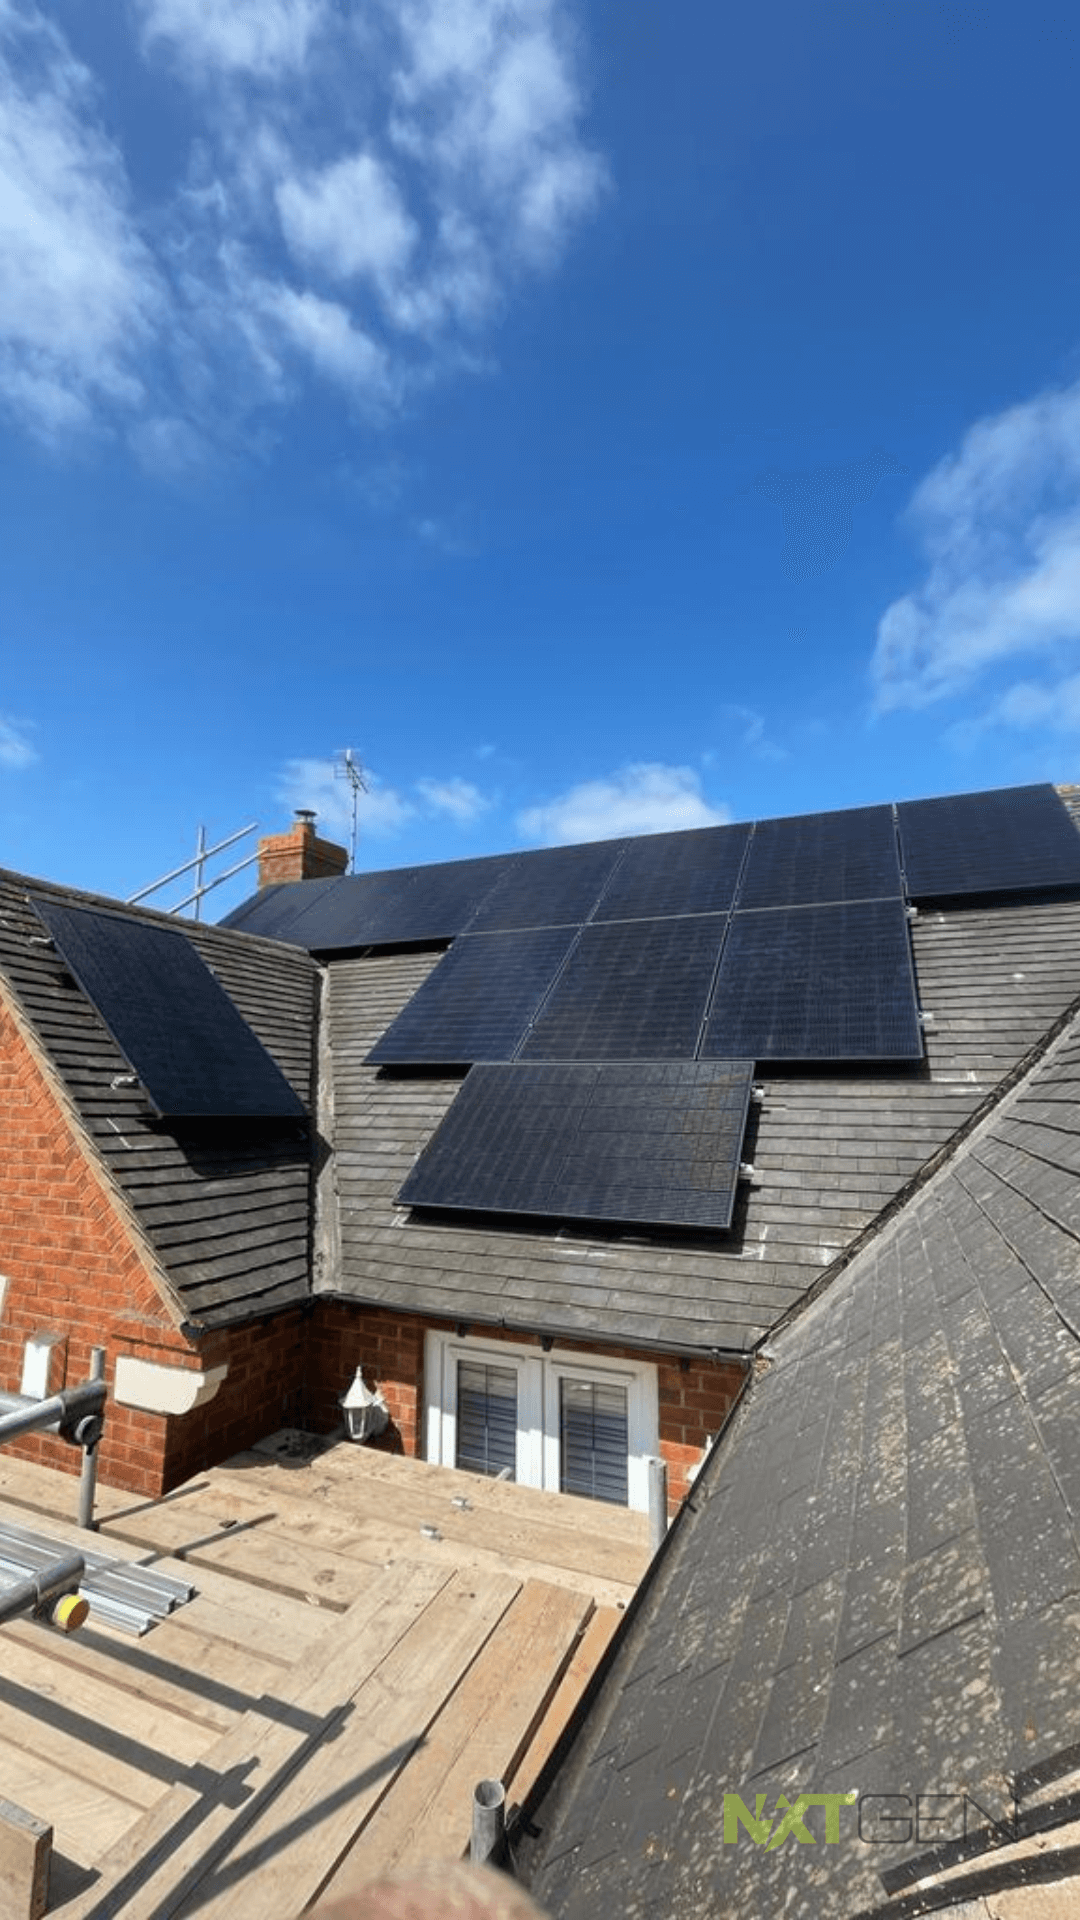 12 Solar Panels Install on Two Roofs Photo